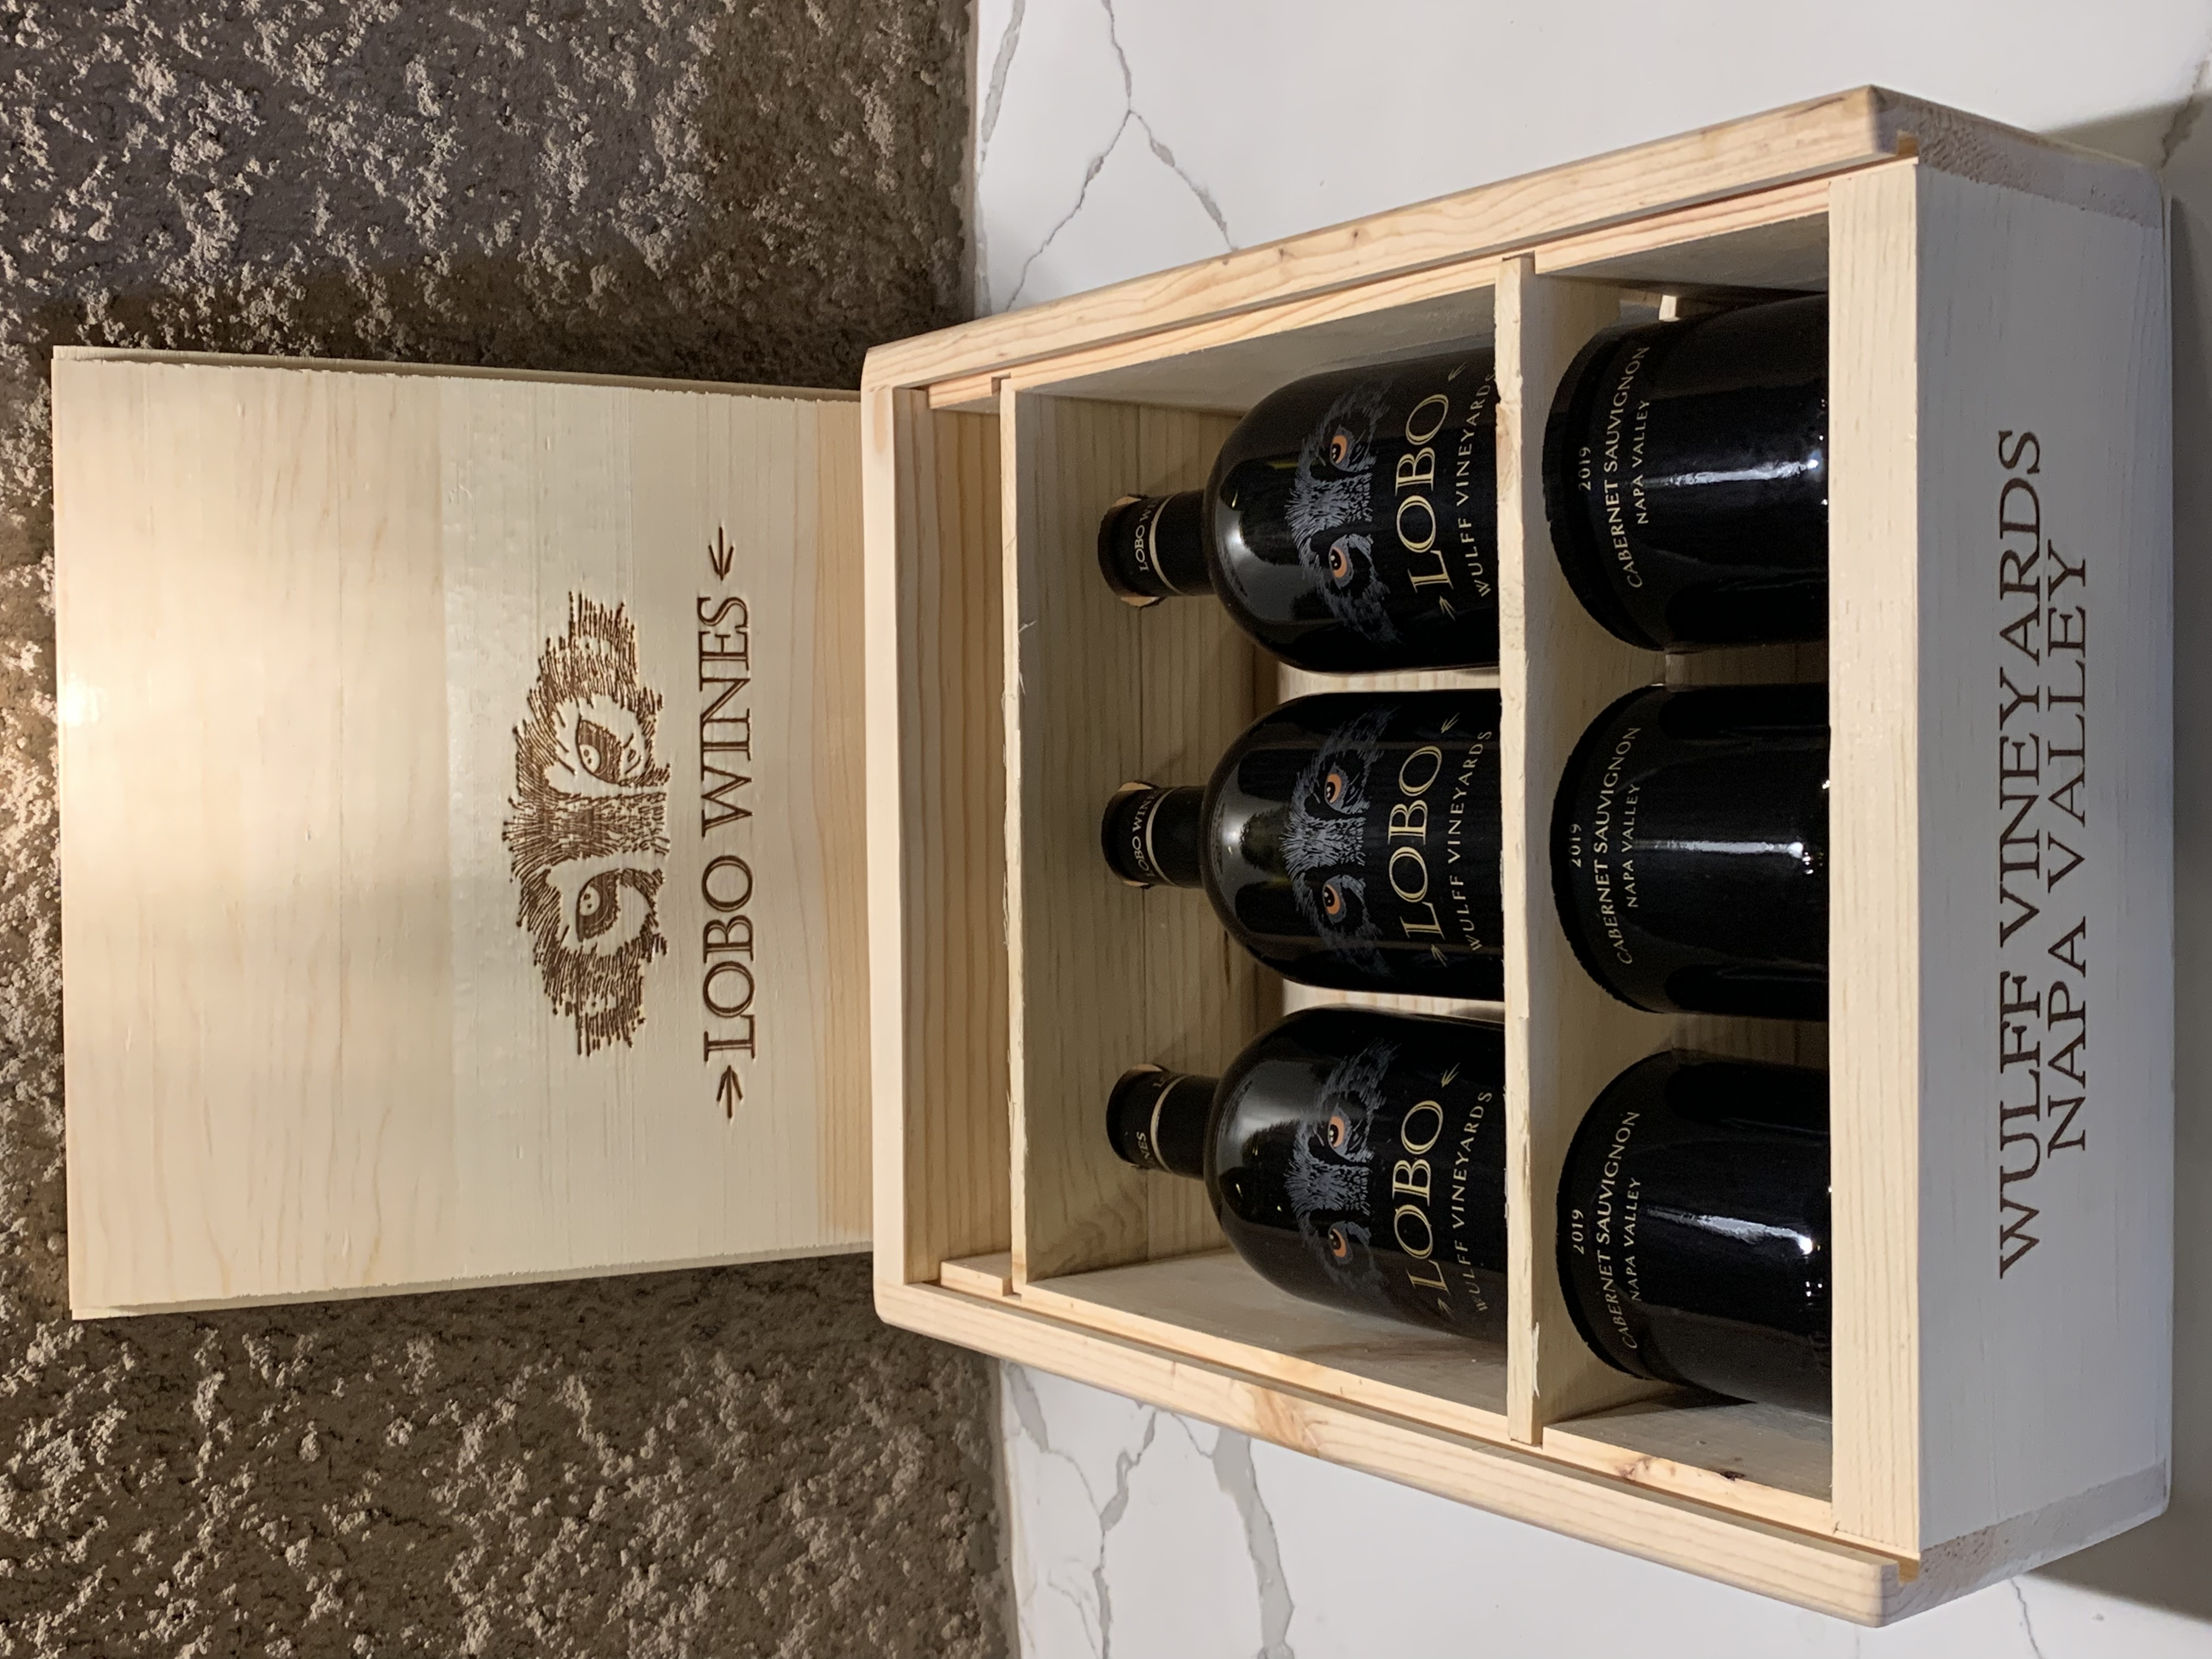 Product Image for Napa Valley Cabernet Vertical